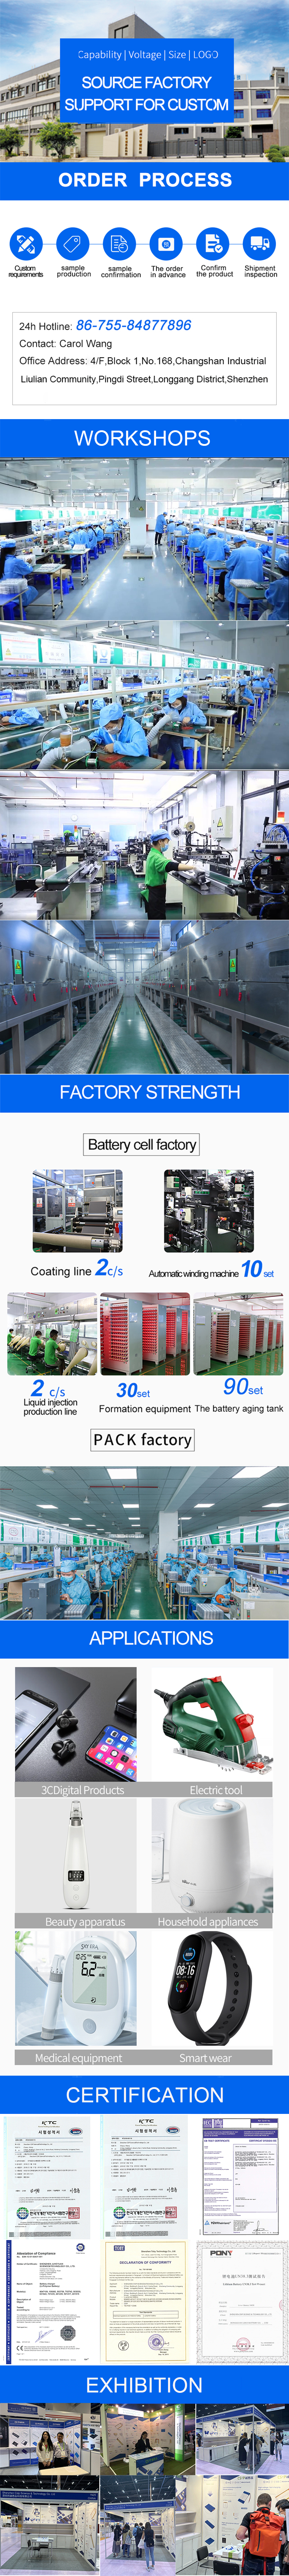 lithium ion battery recycling plant